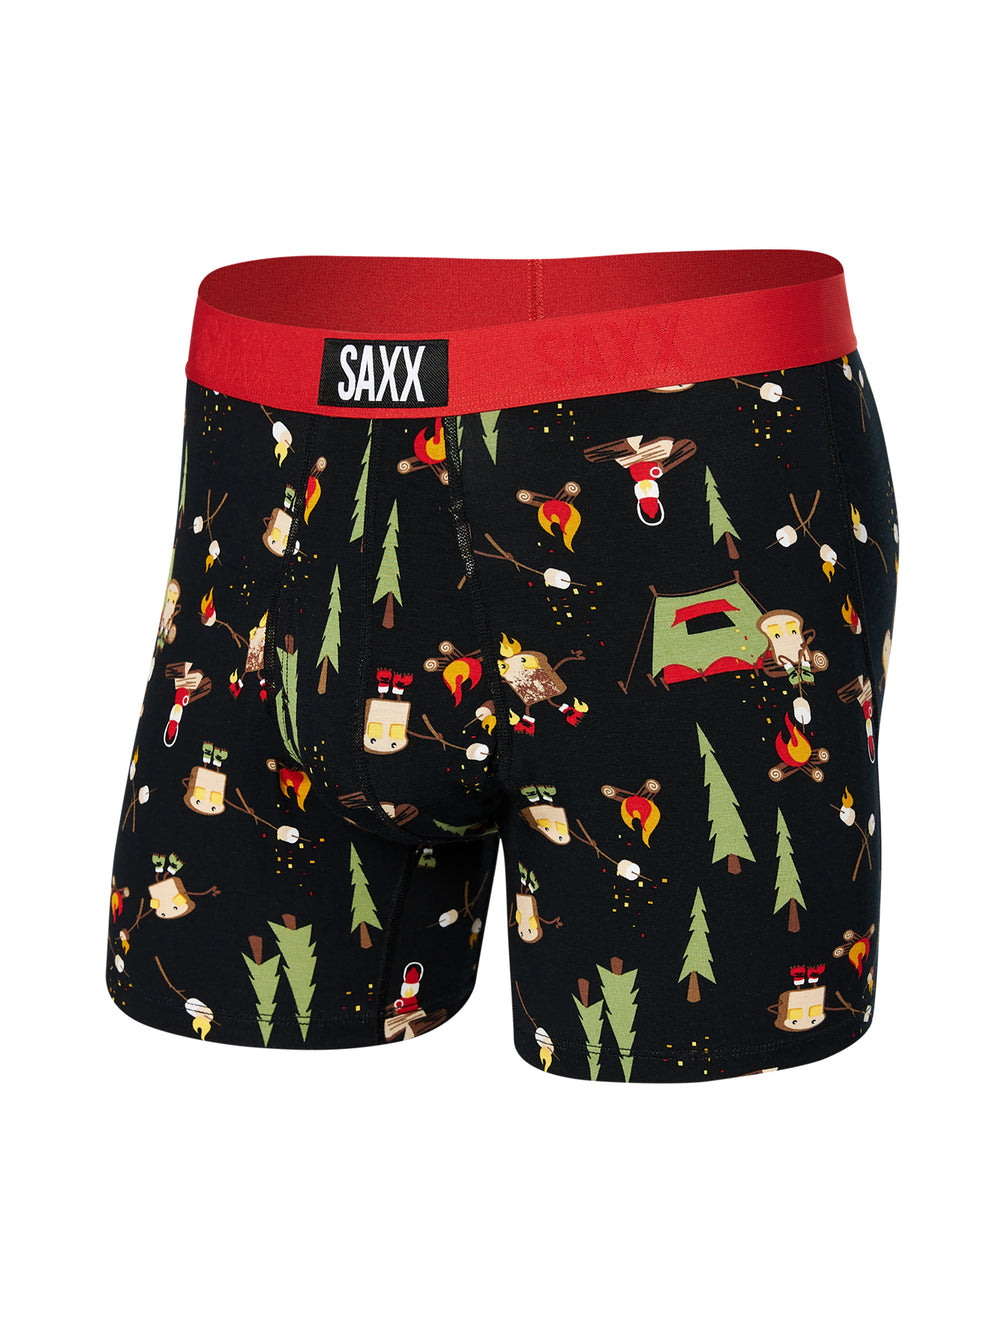 Gift him comfort this holiday with Saxx Underwear! Perfect for his